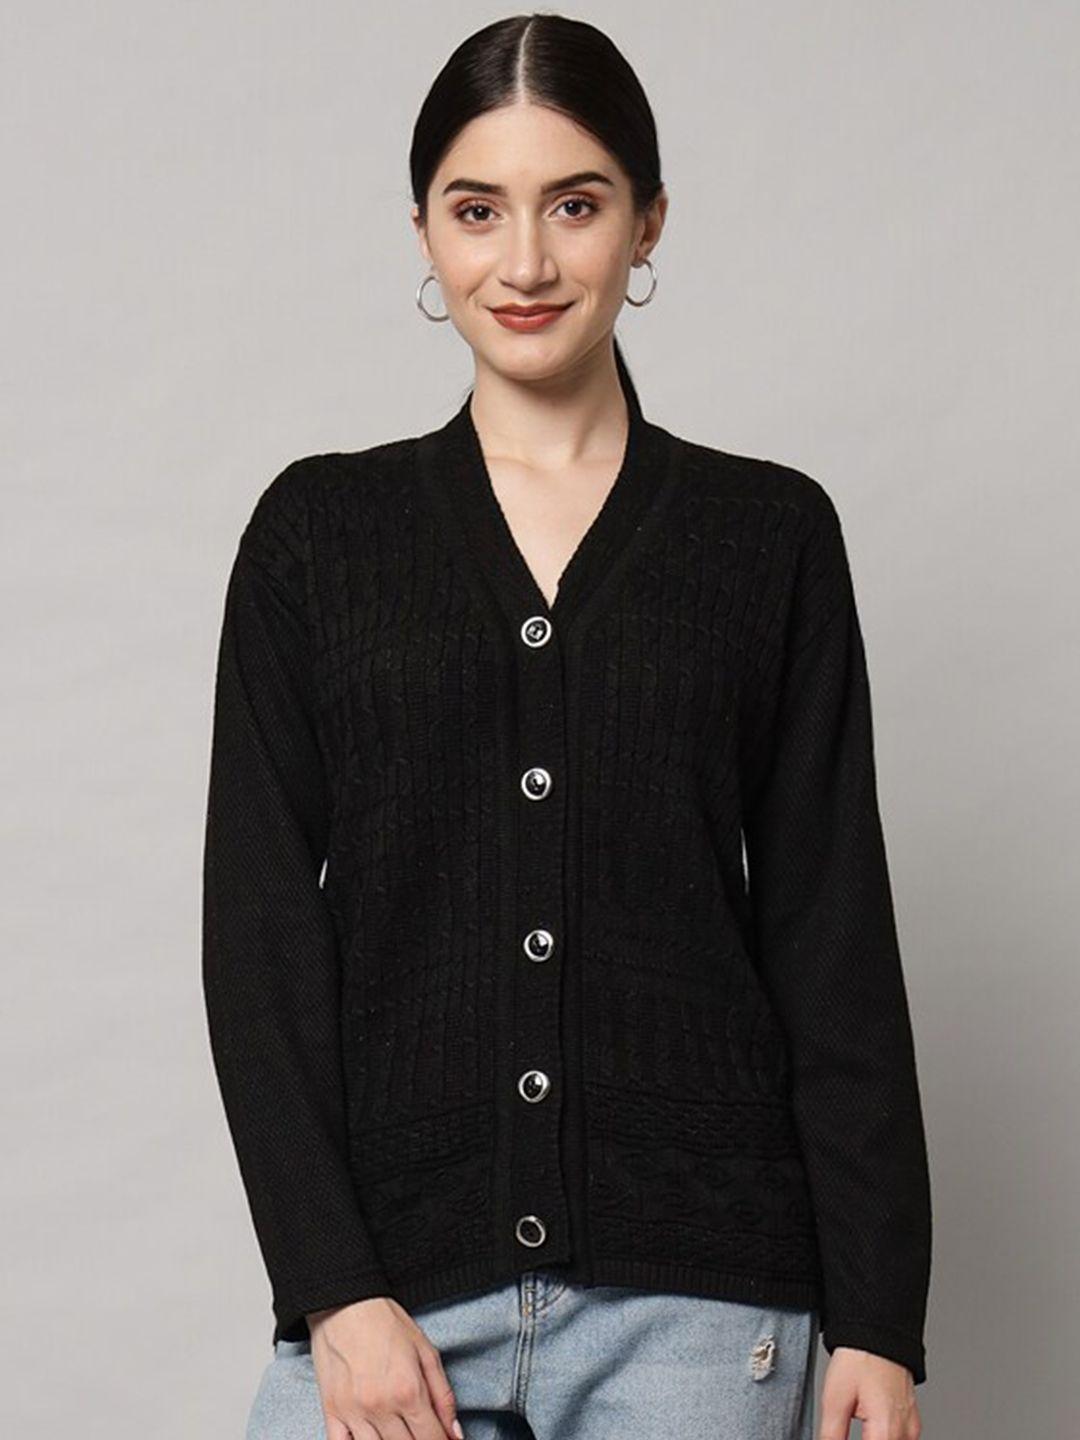 ewools cable knit v-neck pure woollen cardigan